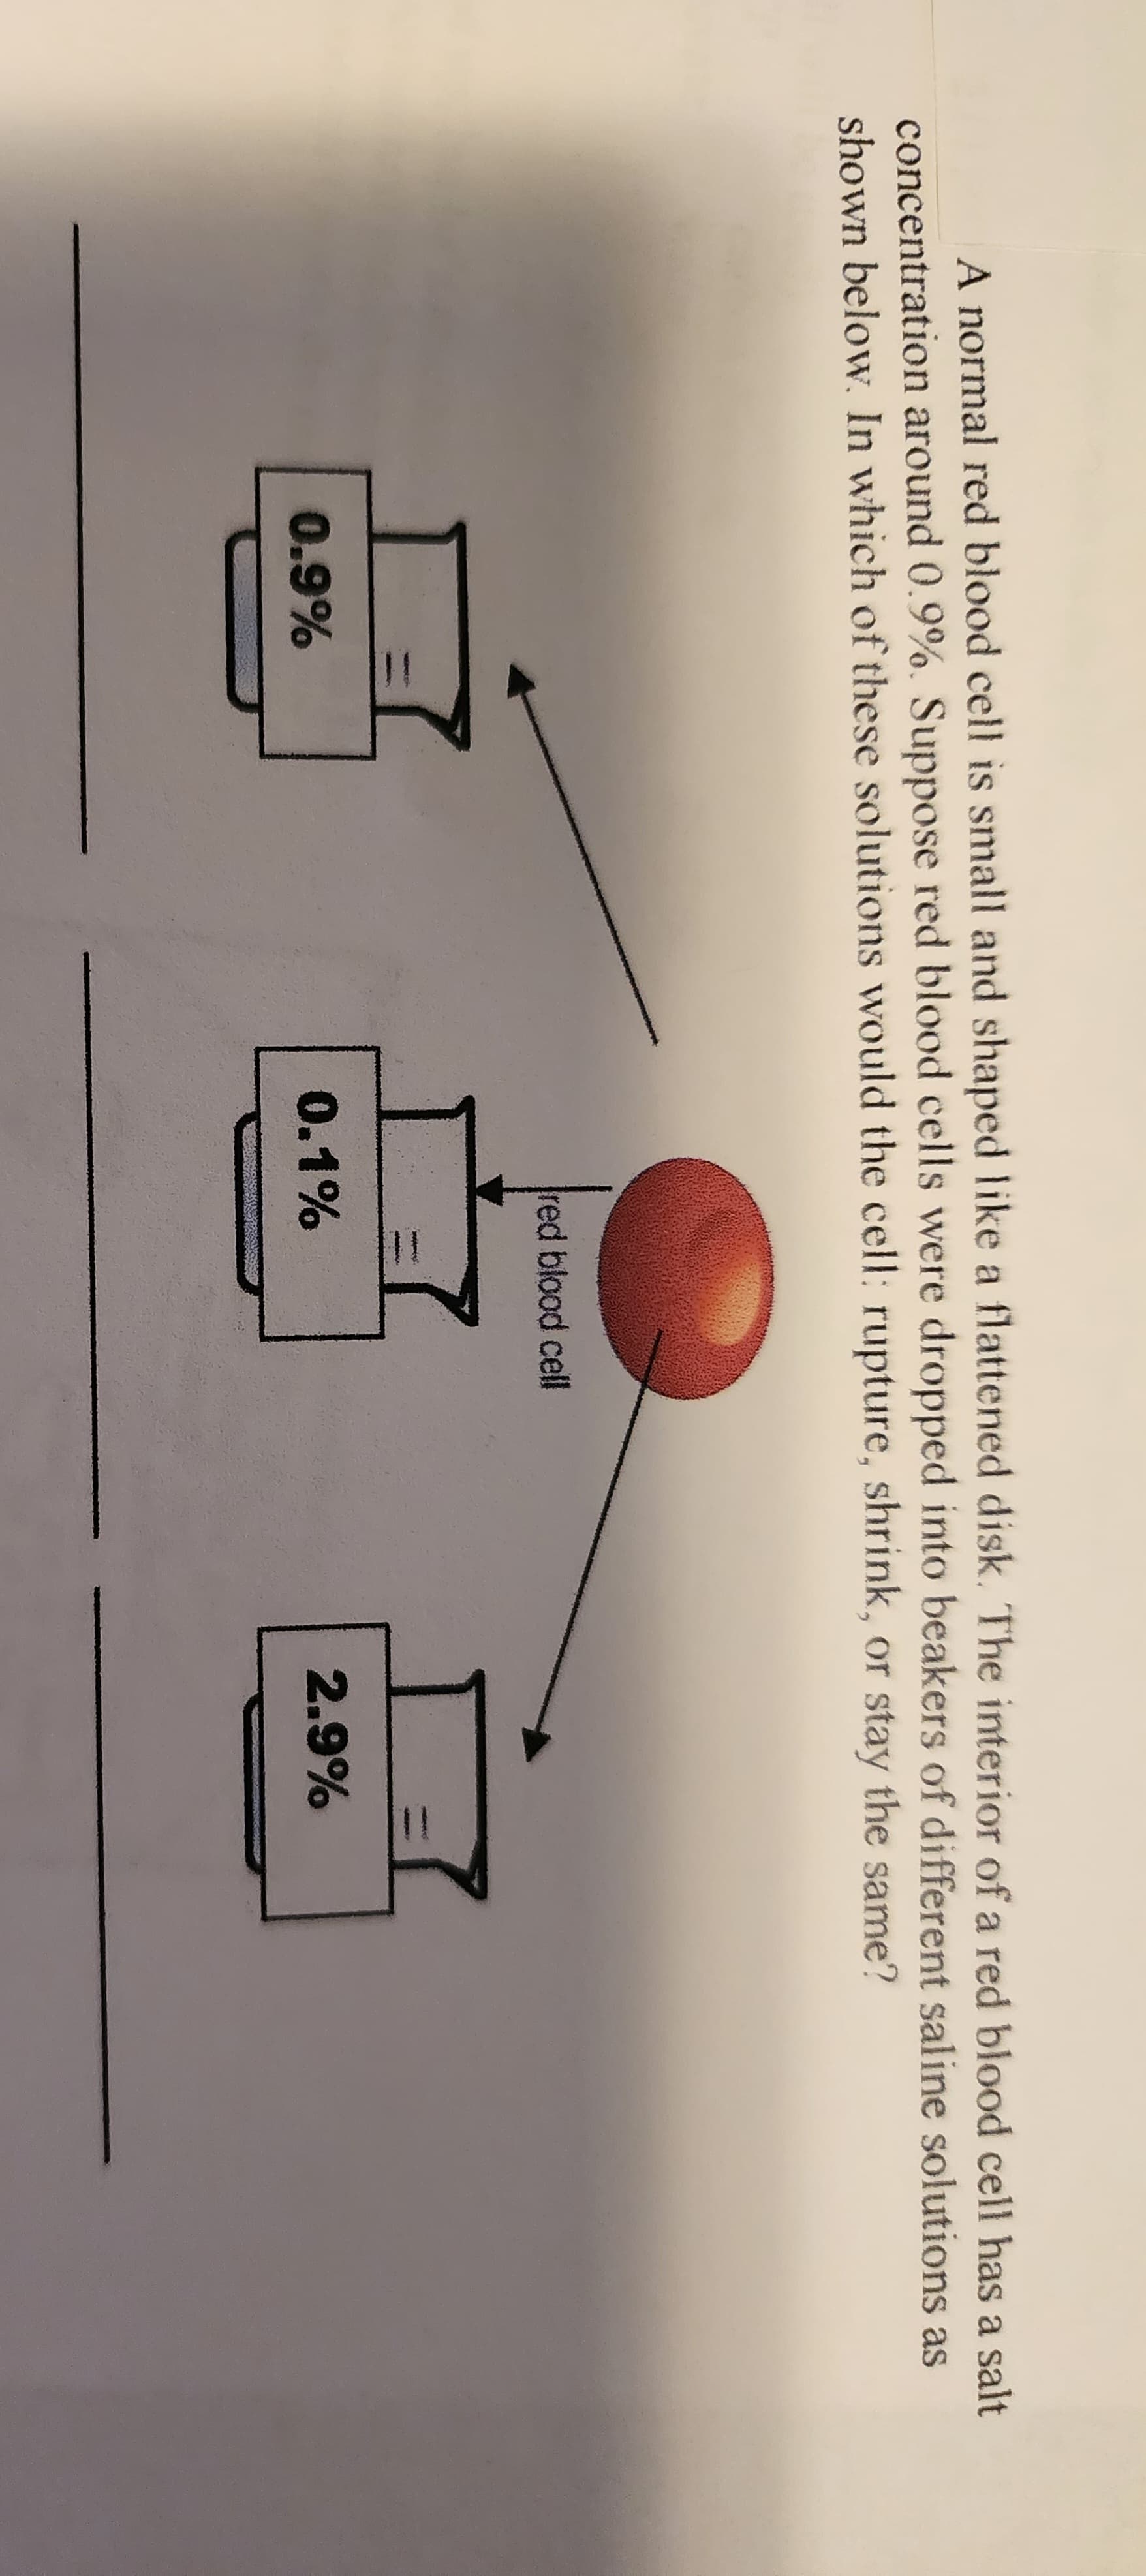 A normal red blood cell is small and shaped like a flattened disk. The interior of a red blood cell has a salt
concentration around 0.9%. Suppose red blood cells were dropped into beakers of different saline solutions as
shown below. In which of these solutions would the cell: rupture, shrink, or stay the same?
0.9%
red blood cell
0.1%
2.9%